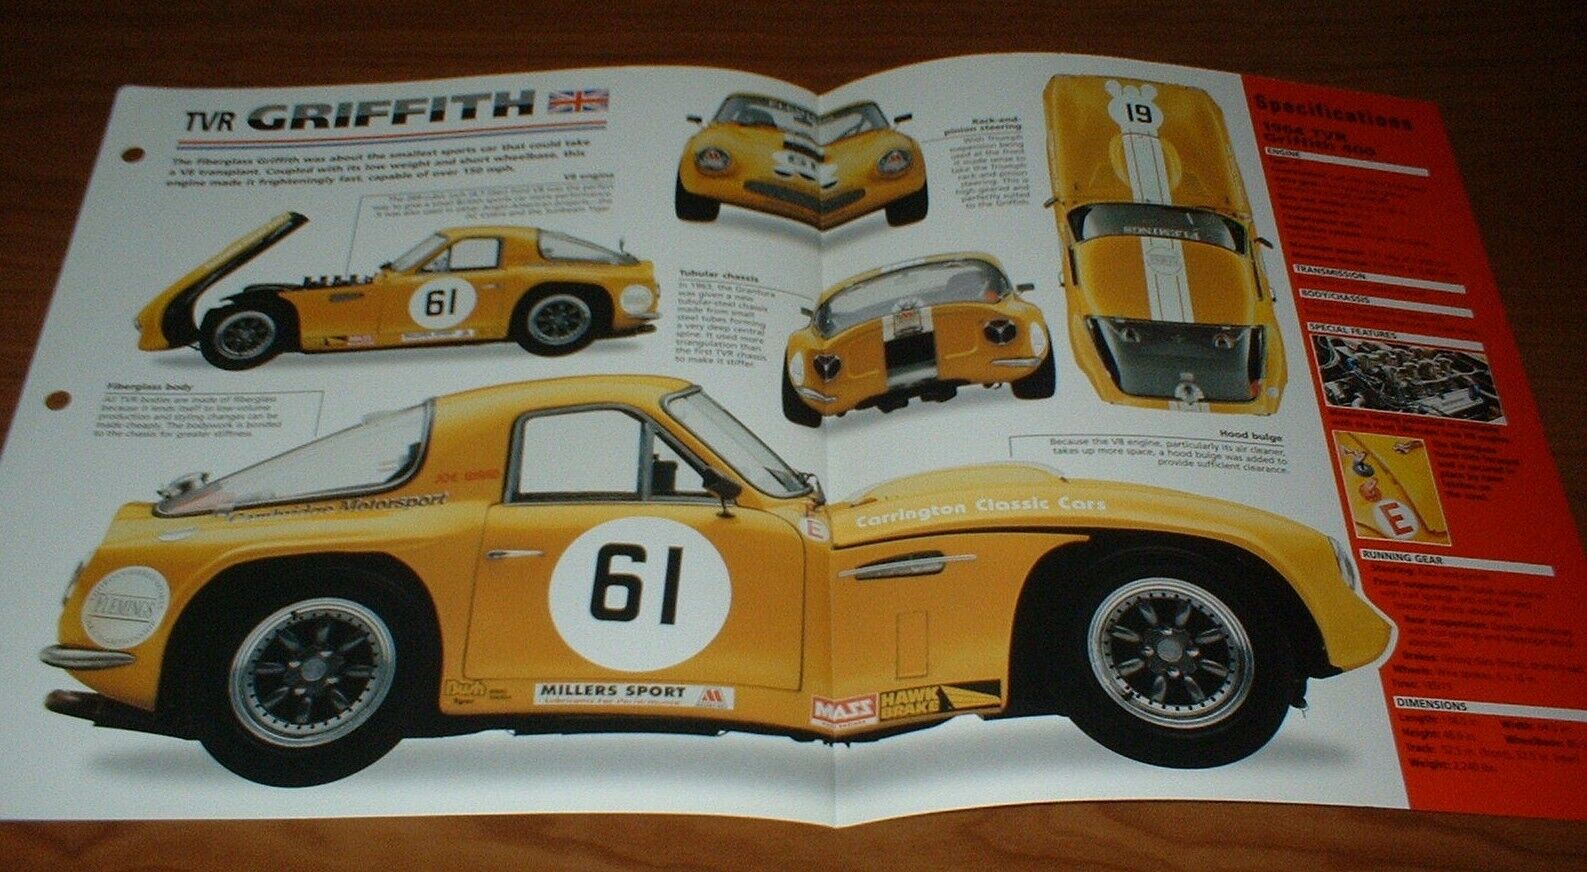 ★★1964 TVR GRIFFITH 400 RACING SPEC SHEET BROCHURE PHOTO POSTER PRINT INFO 64★★